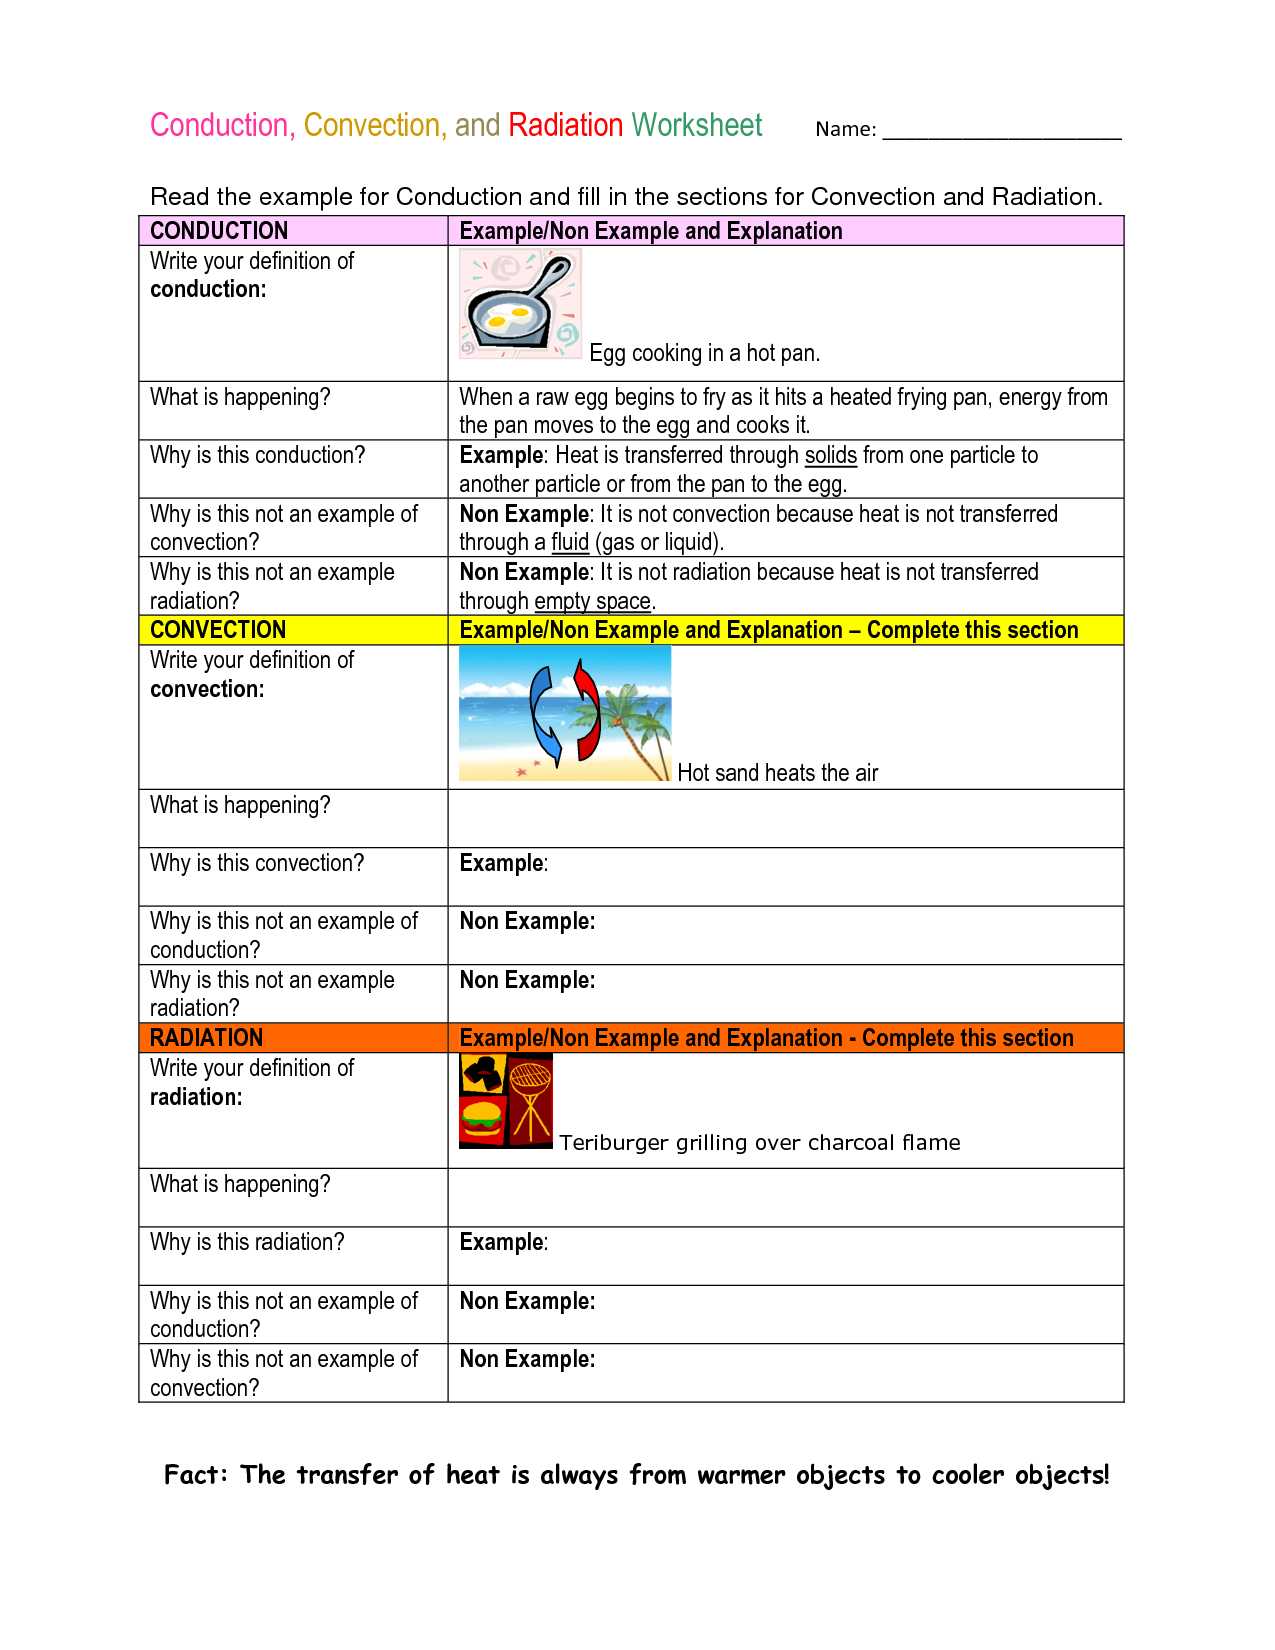 Conduction Convection or Radiation Worksheet Answers or Radiation Convection Conduction Worksheet the Best Worksheets Image